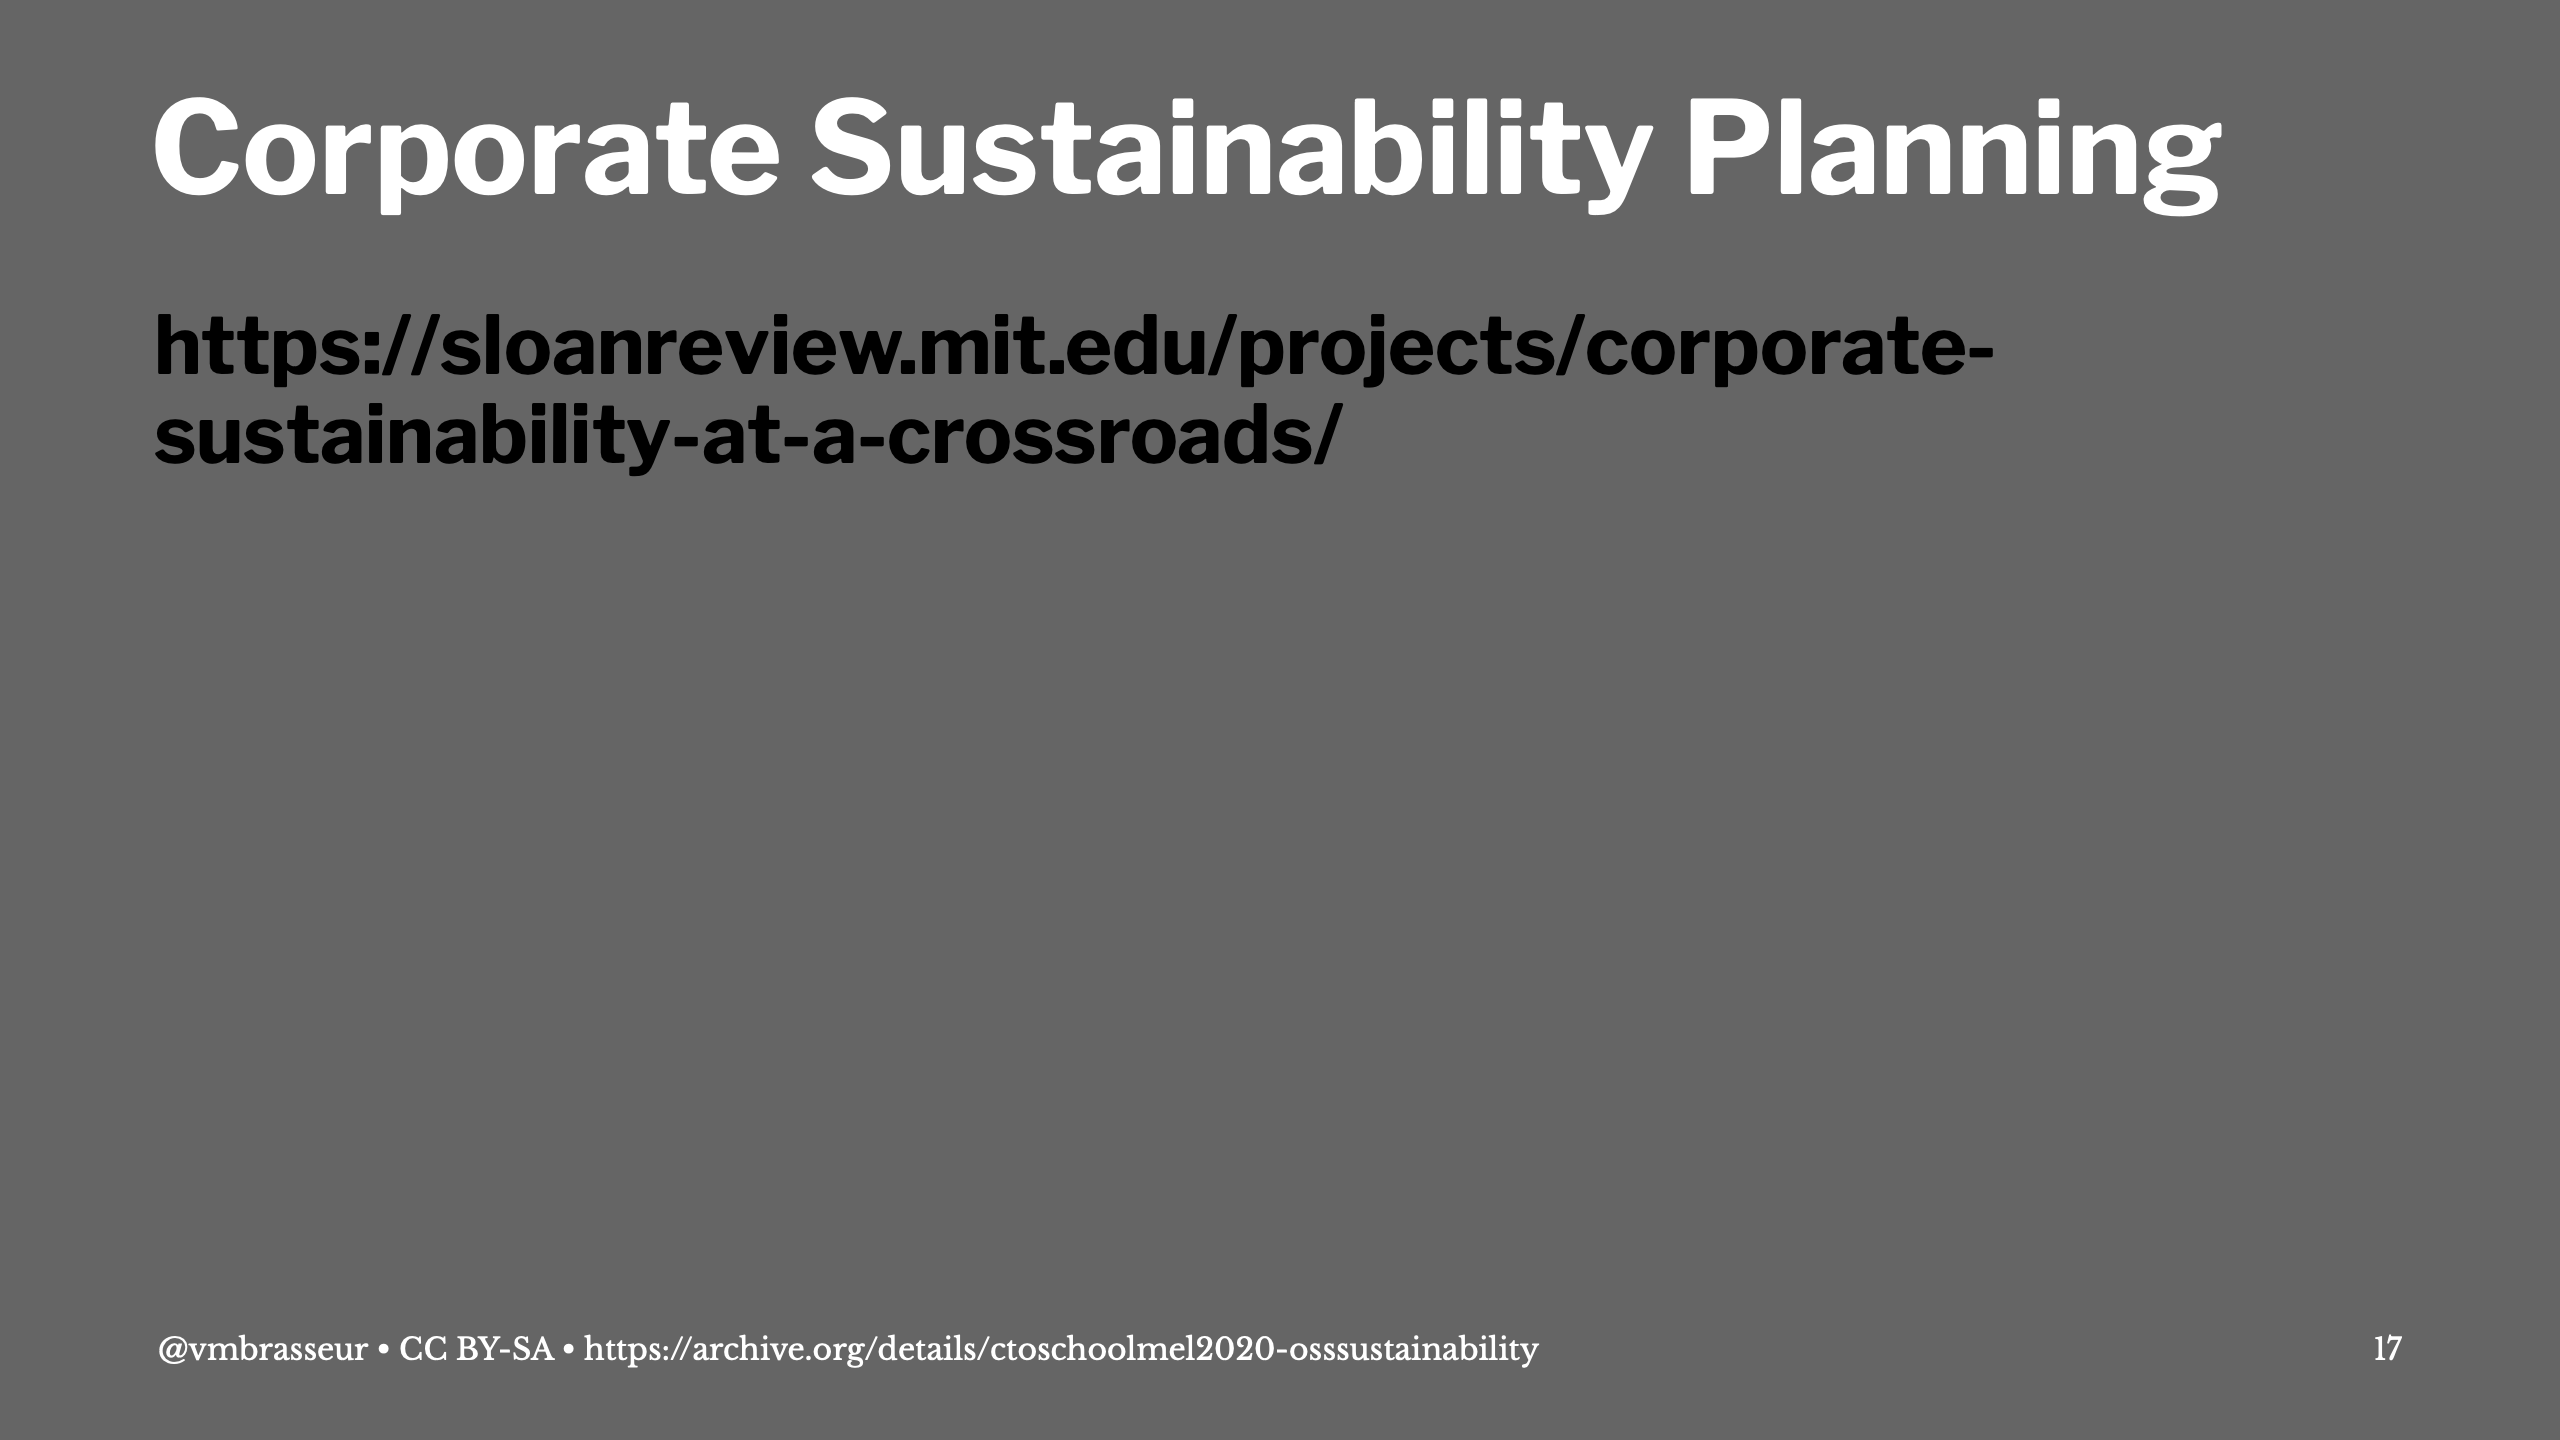 Link to the corporate sustainability planning article on the MIT Sloan site